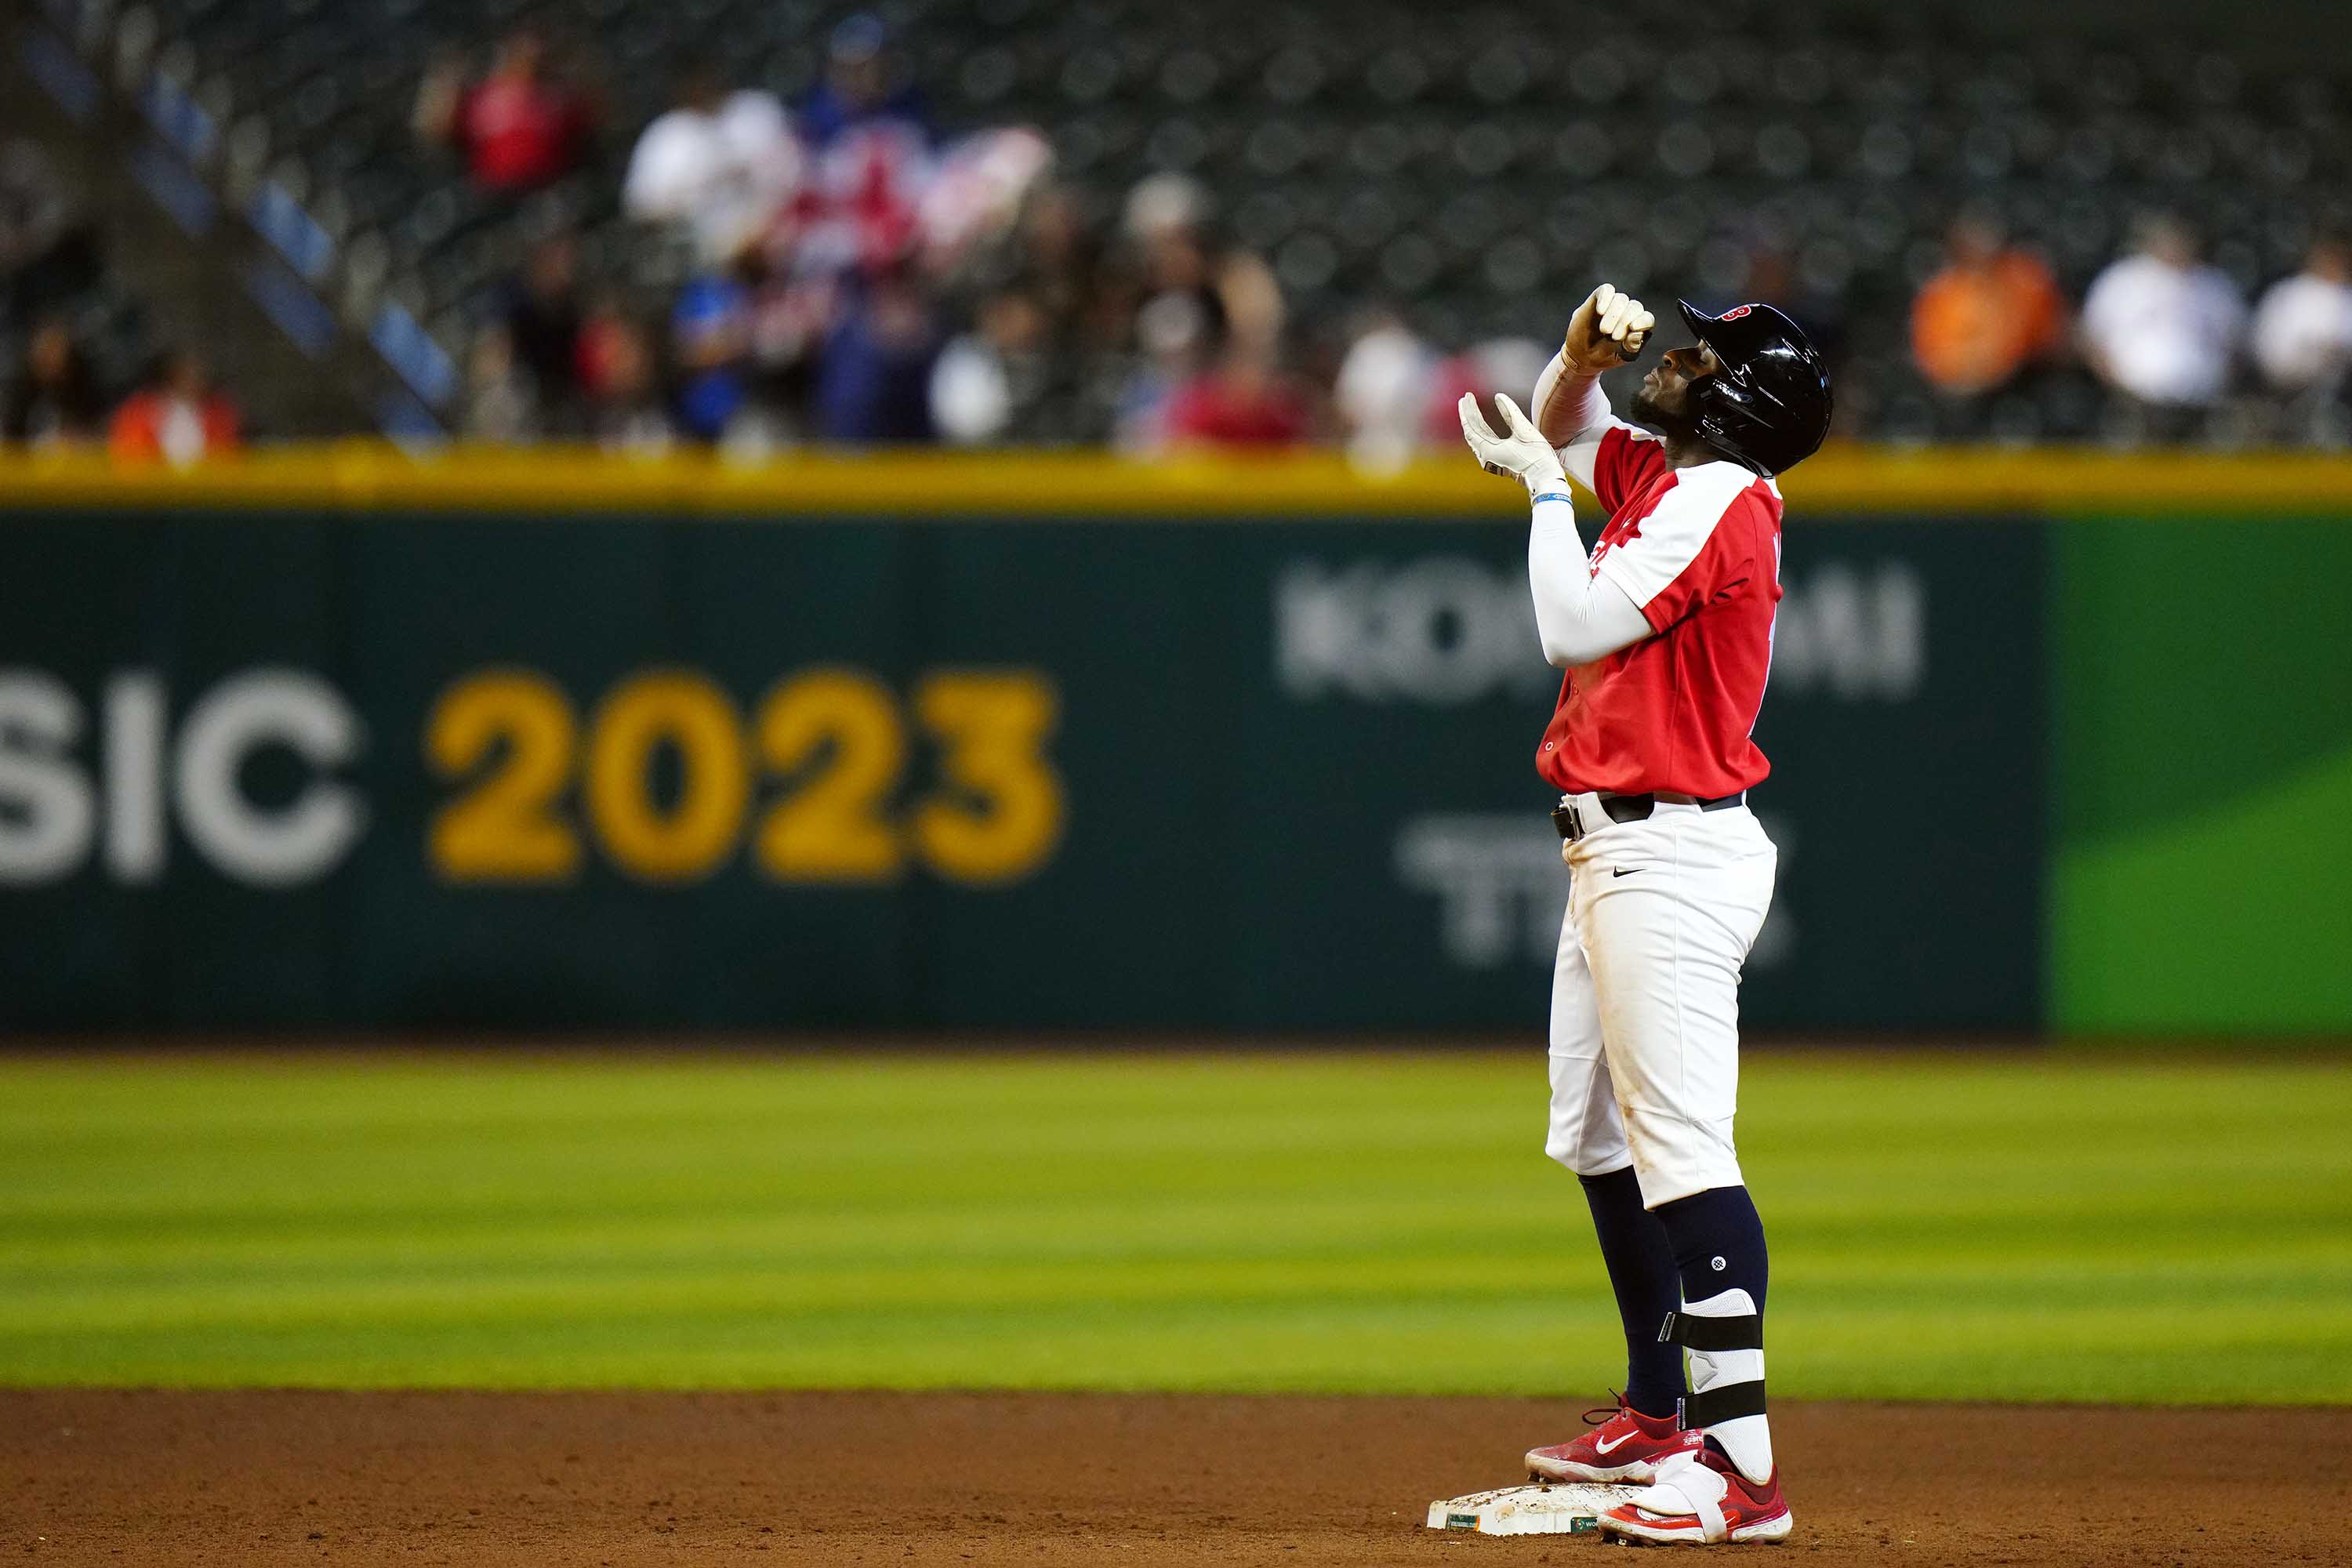 Britain's unlikely heroes win in the World Baseball Classic |